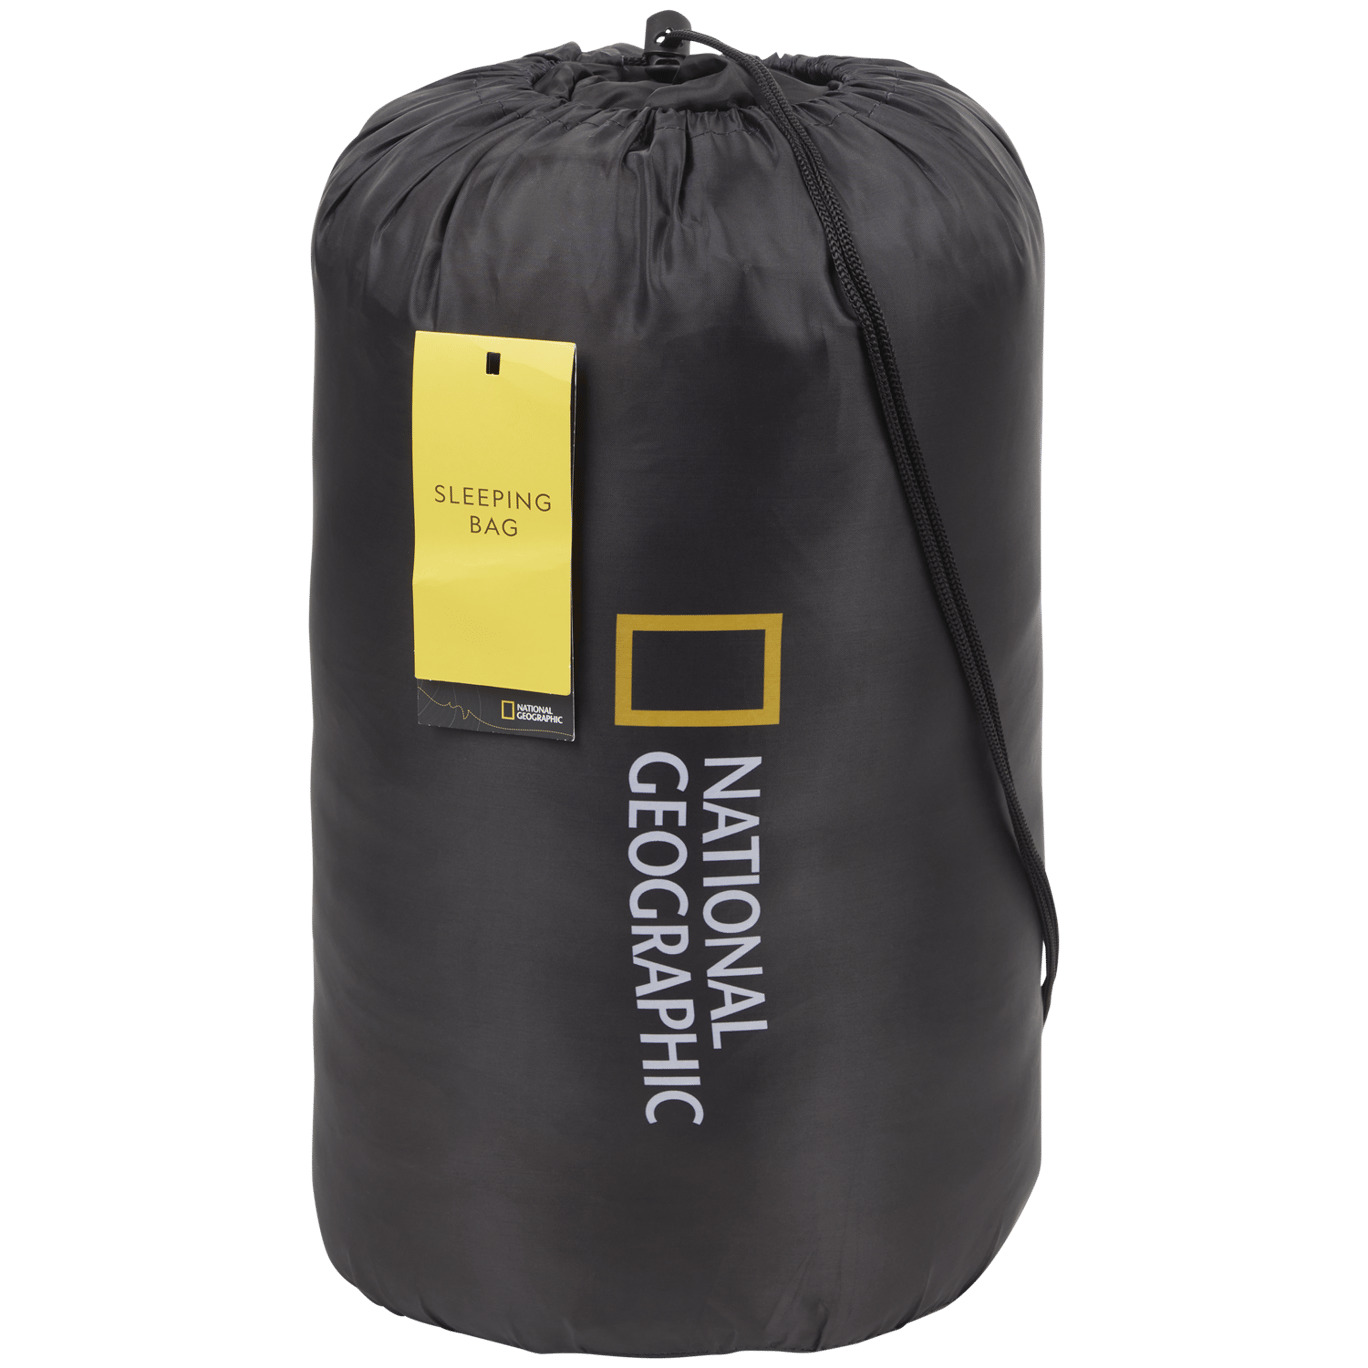 Sac de couchage National Geographic